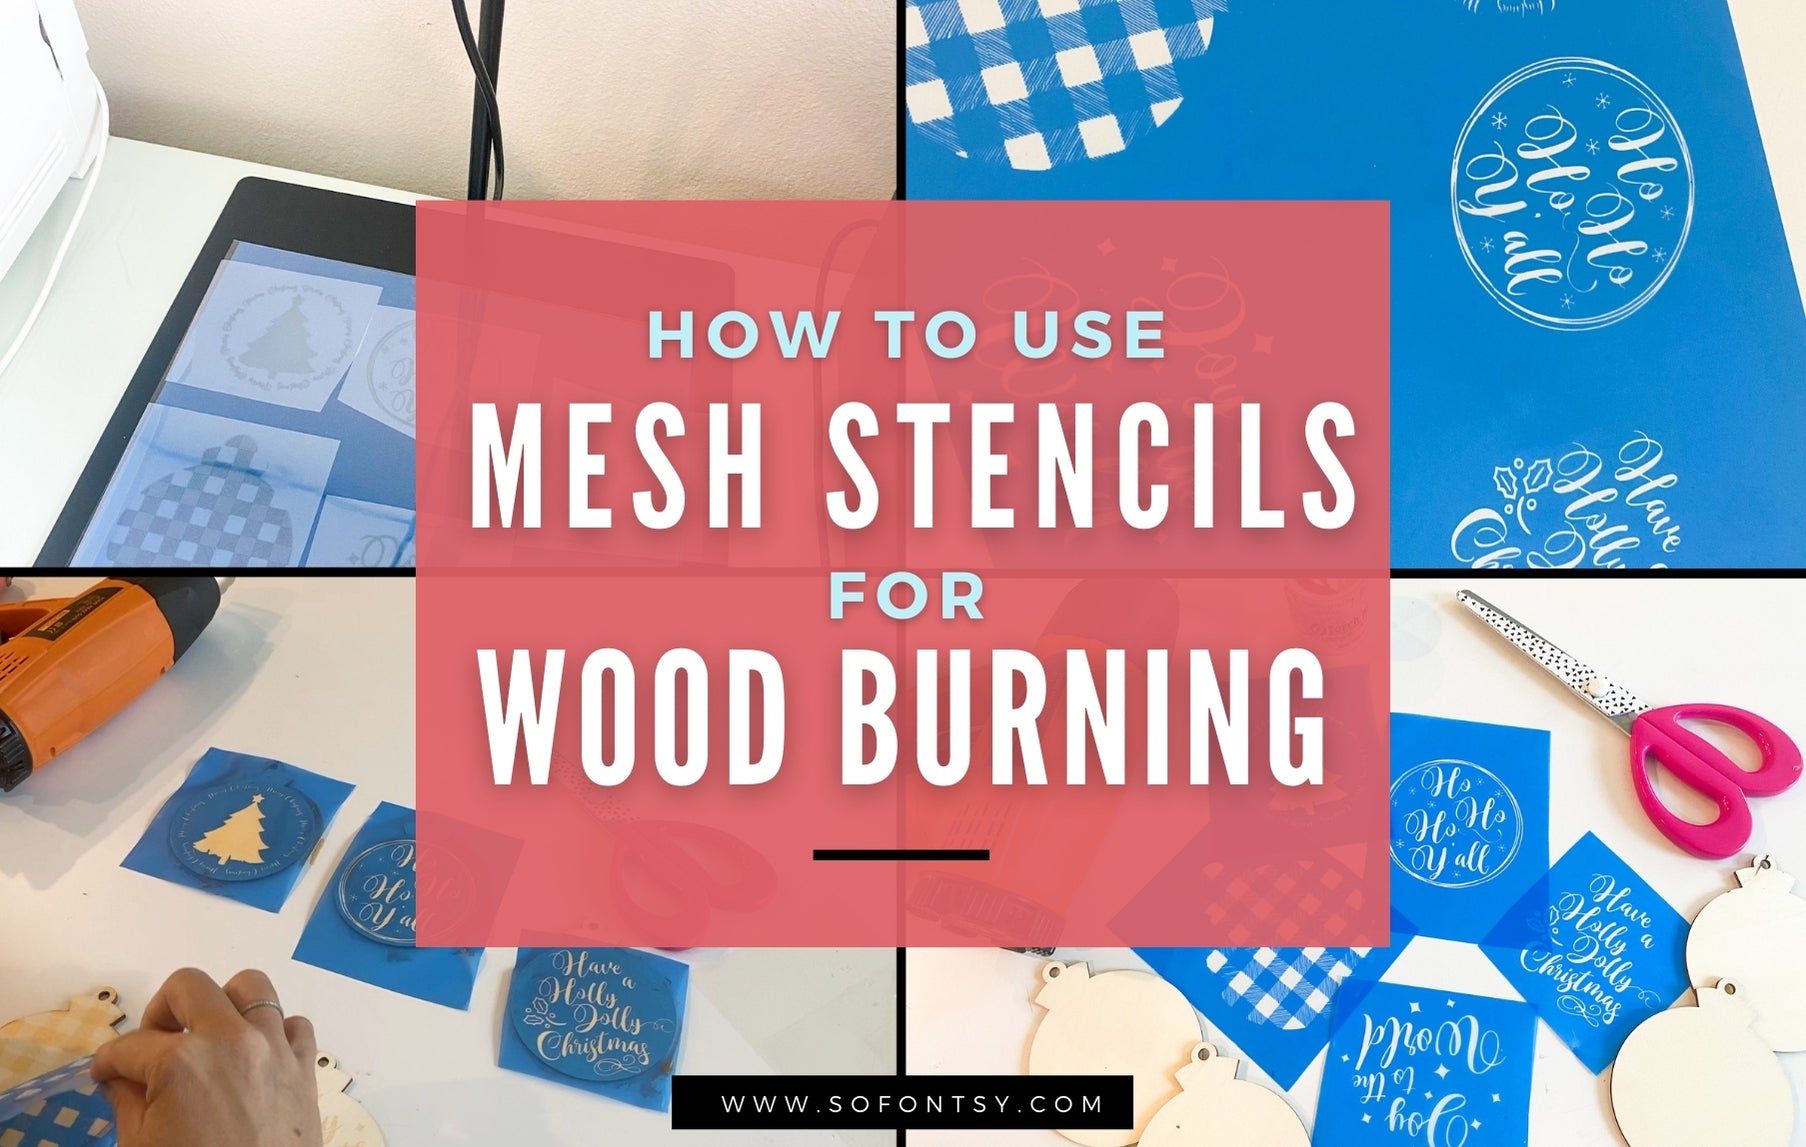 How to Use Mesh Stencils for Wood Burning - So Fontsy